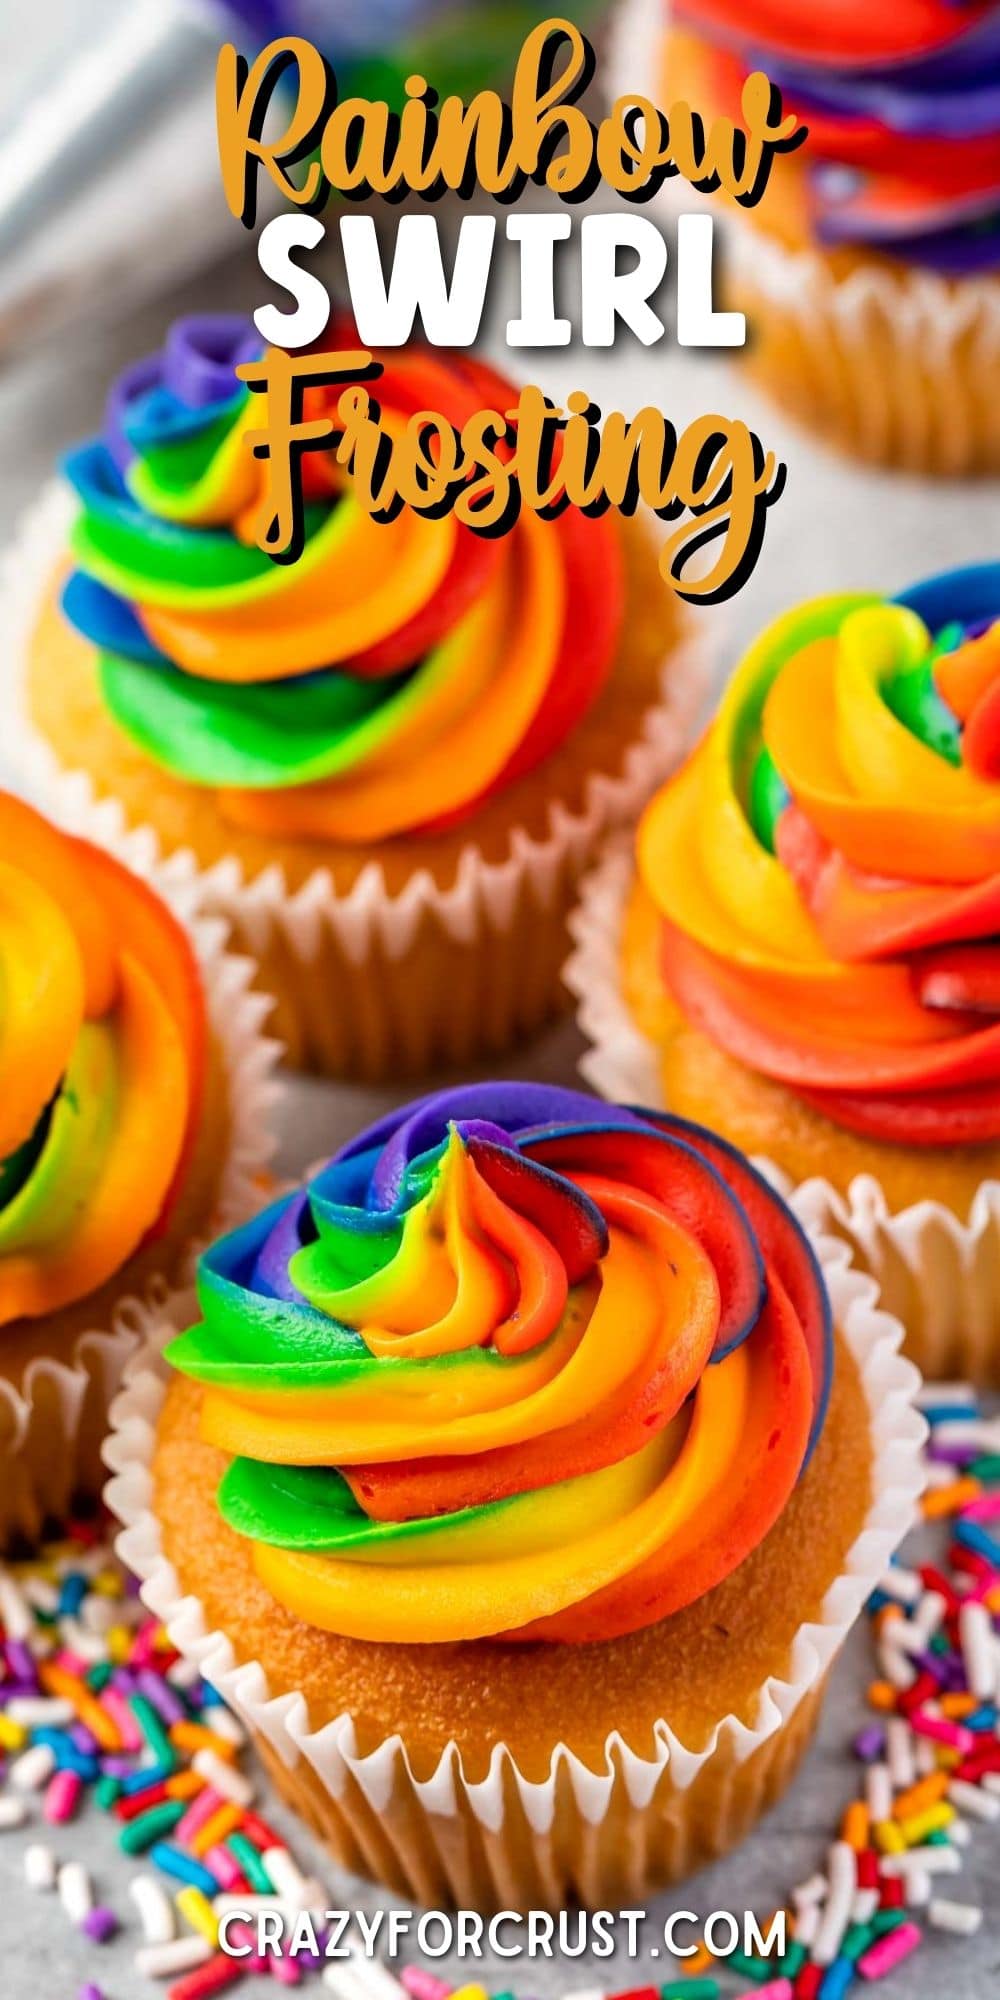 Overhead shot of rainbow swirl frosting on top of vanilla cupcakes with recipe title on top of image